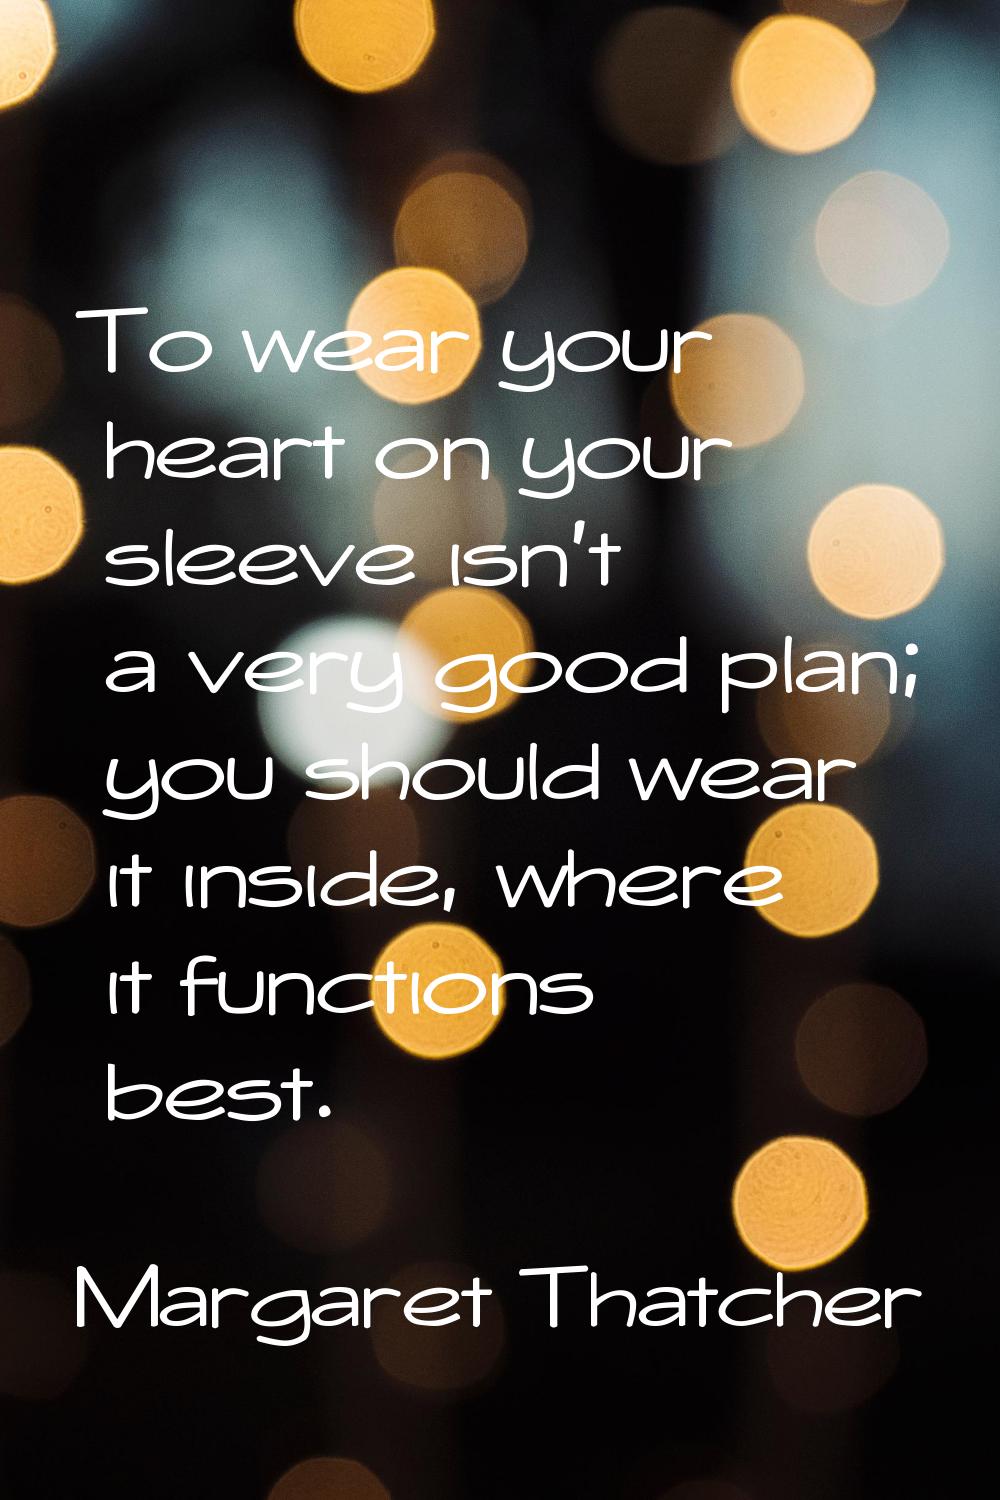 To wear your heart on your sleeve isn't a very good plan; you should wear it inside, where it funct